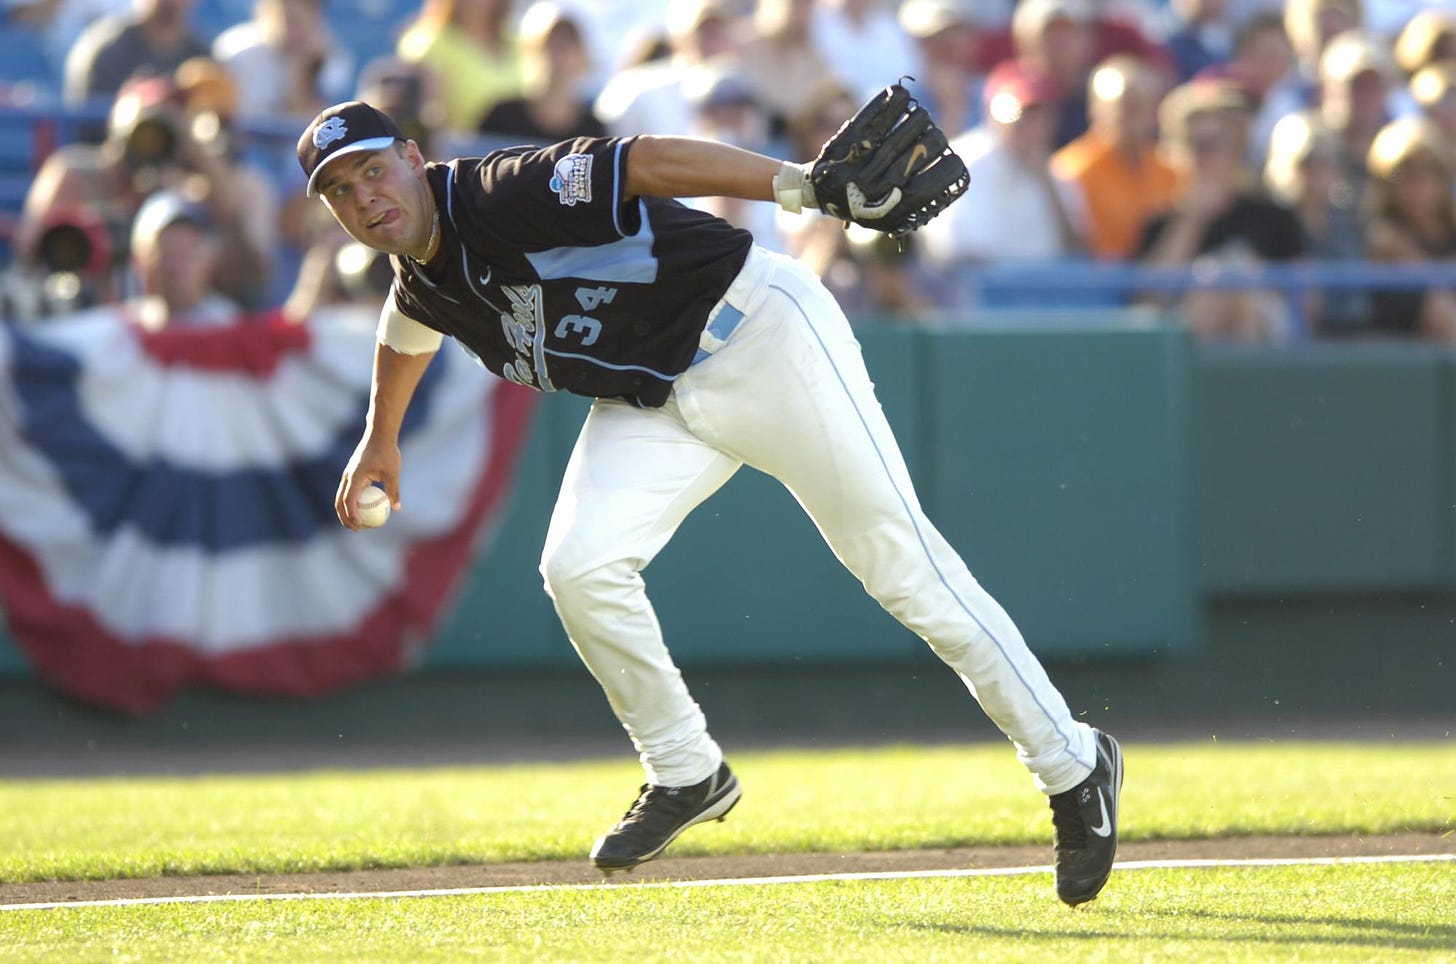 Podcast: Chad Flack on the 2006 College World Series Team, Life After UNC, and More